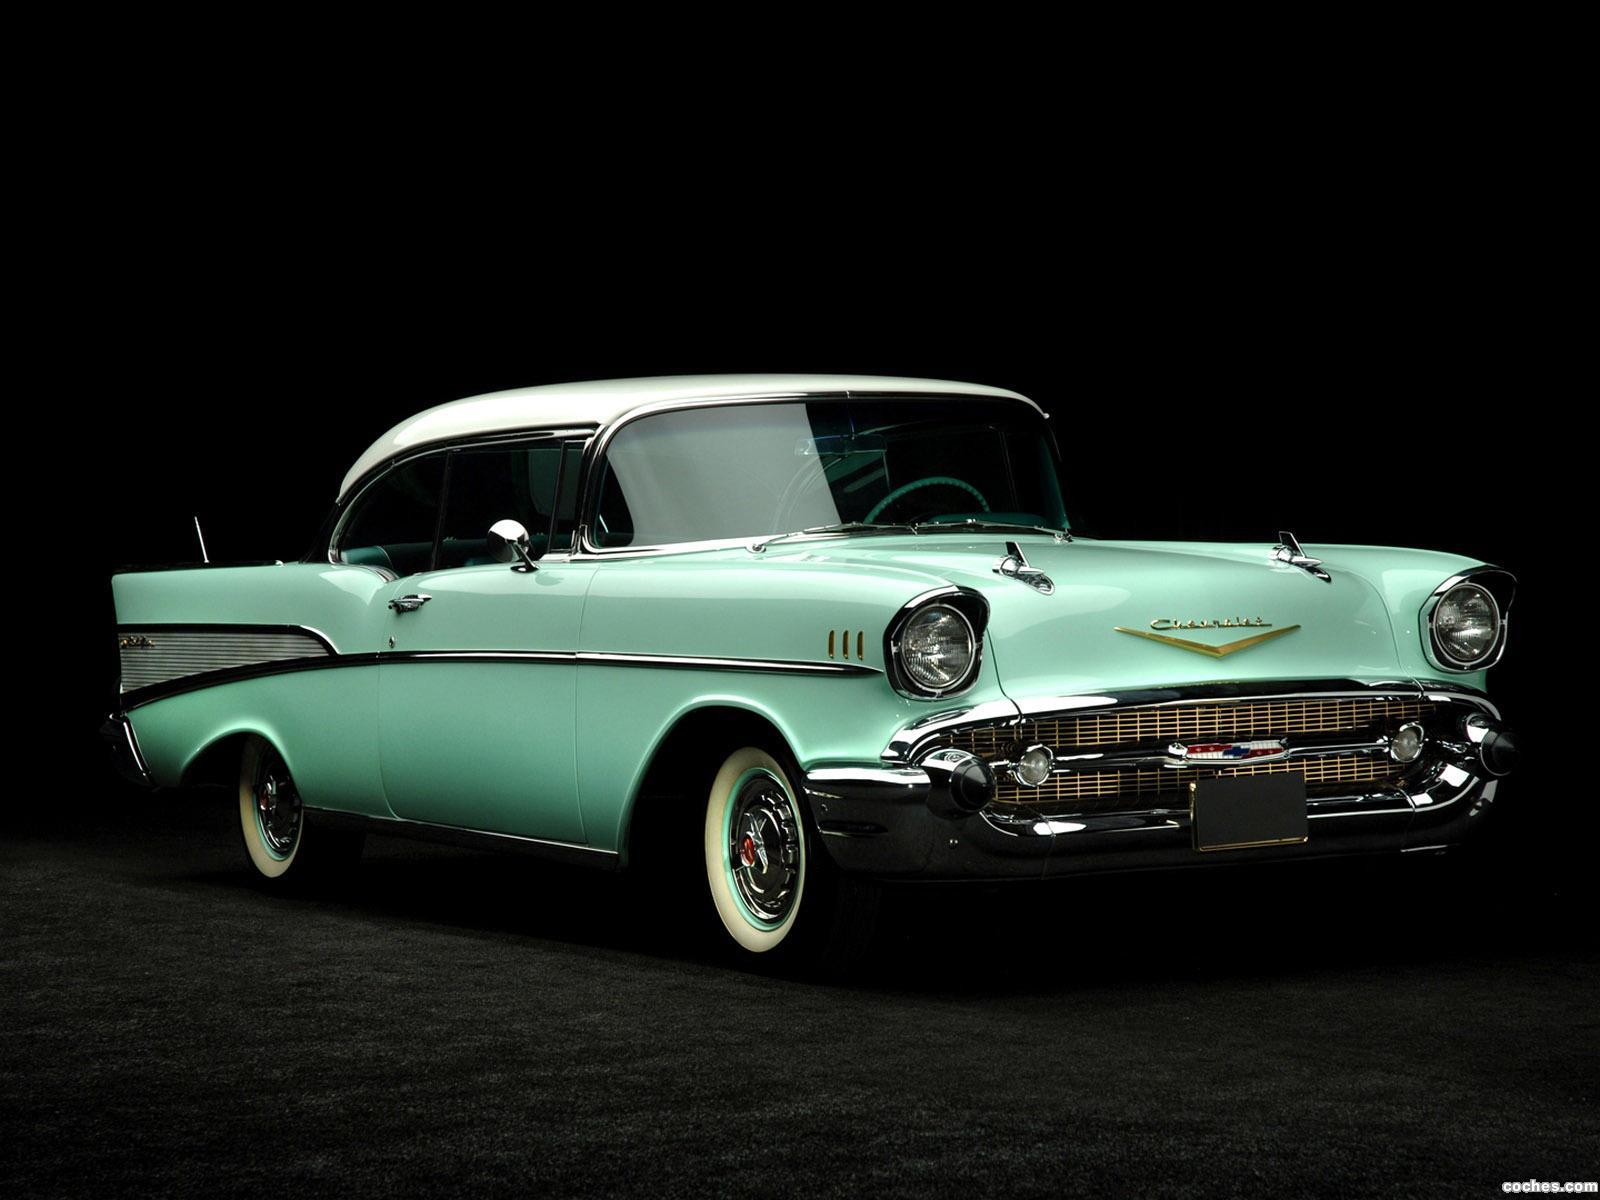 chevrolet_bel-air-sport-coupe-1957_r11